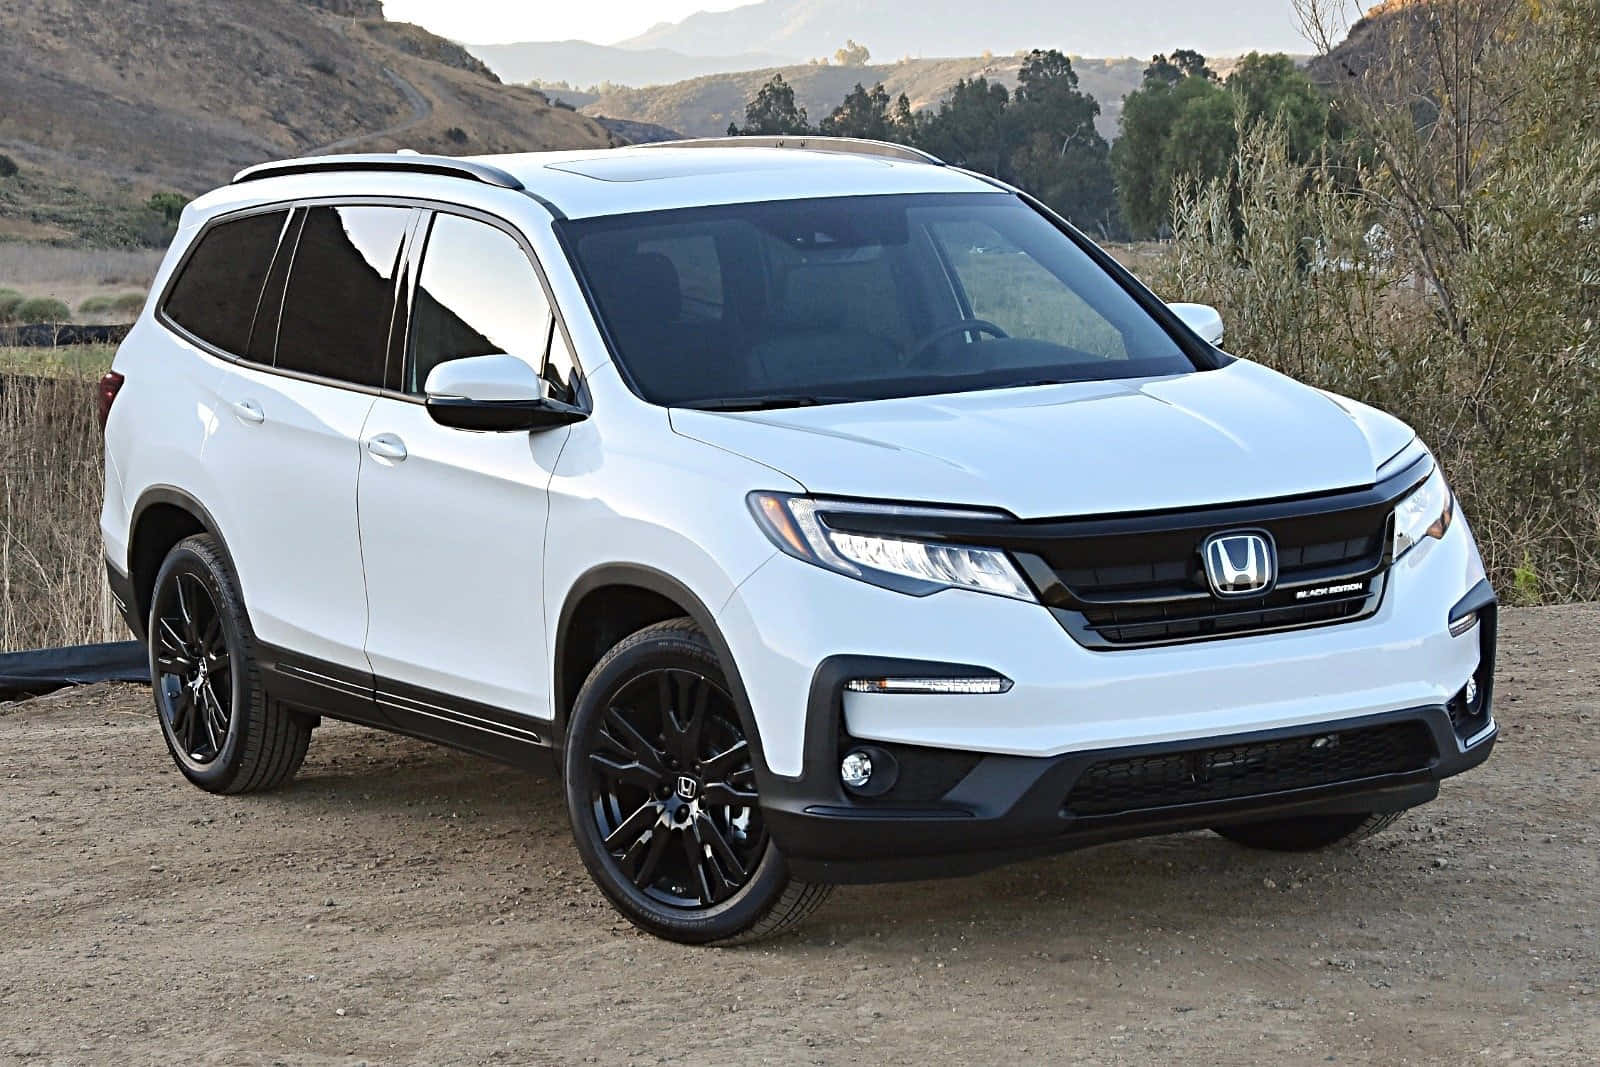 Sophisticated exterior design and economical performance come together in the Honda Pilot.